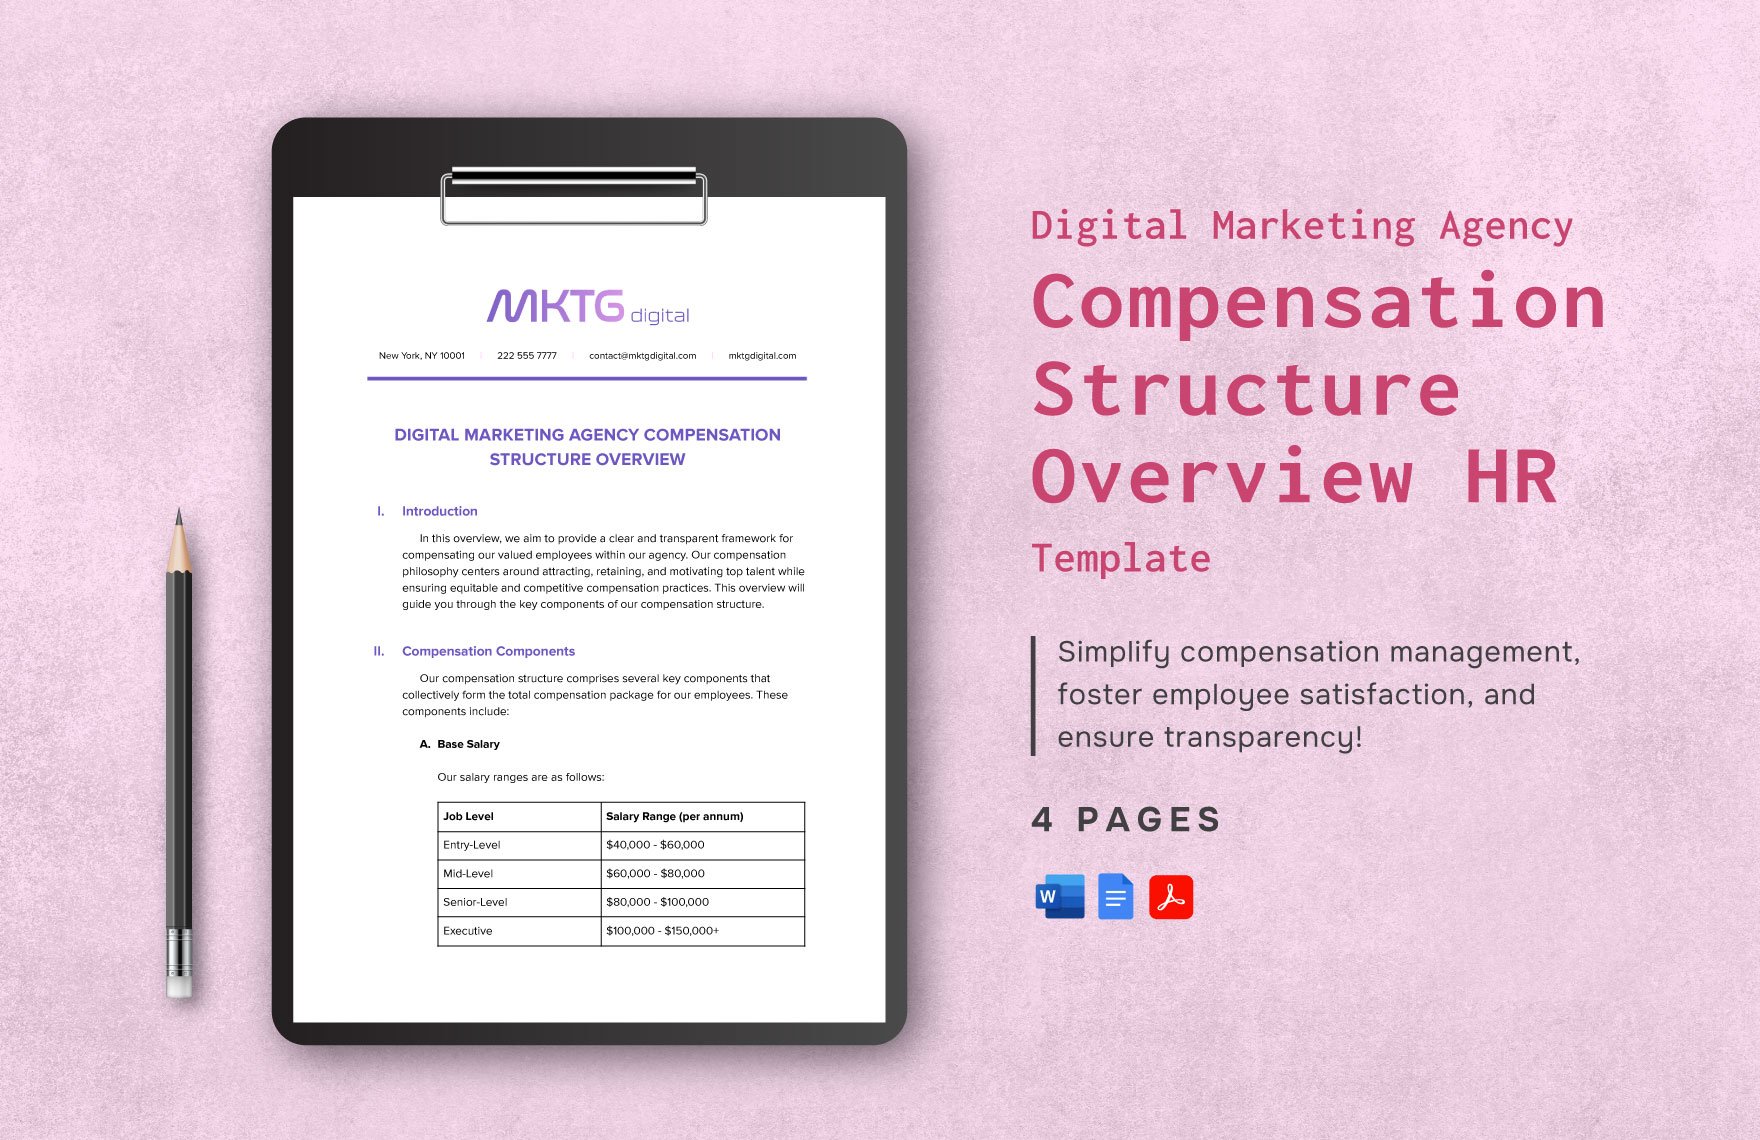 Digital Marketing Agency Compensation Structure Overview HR Template in Word, Google Docs, PDF